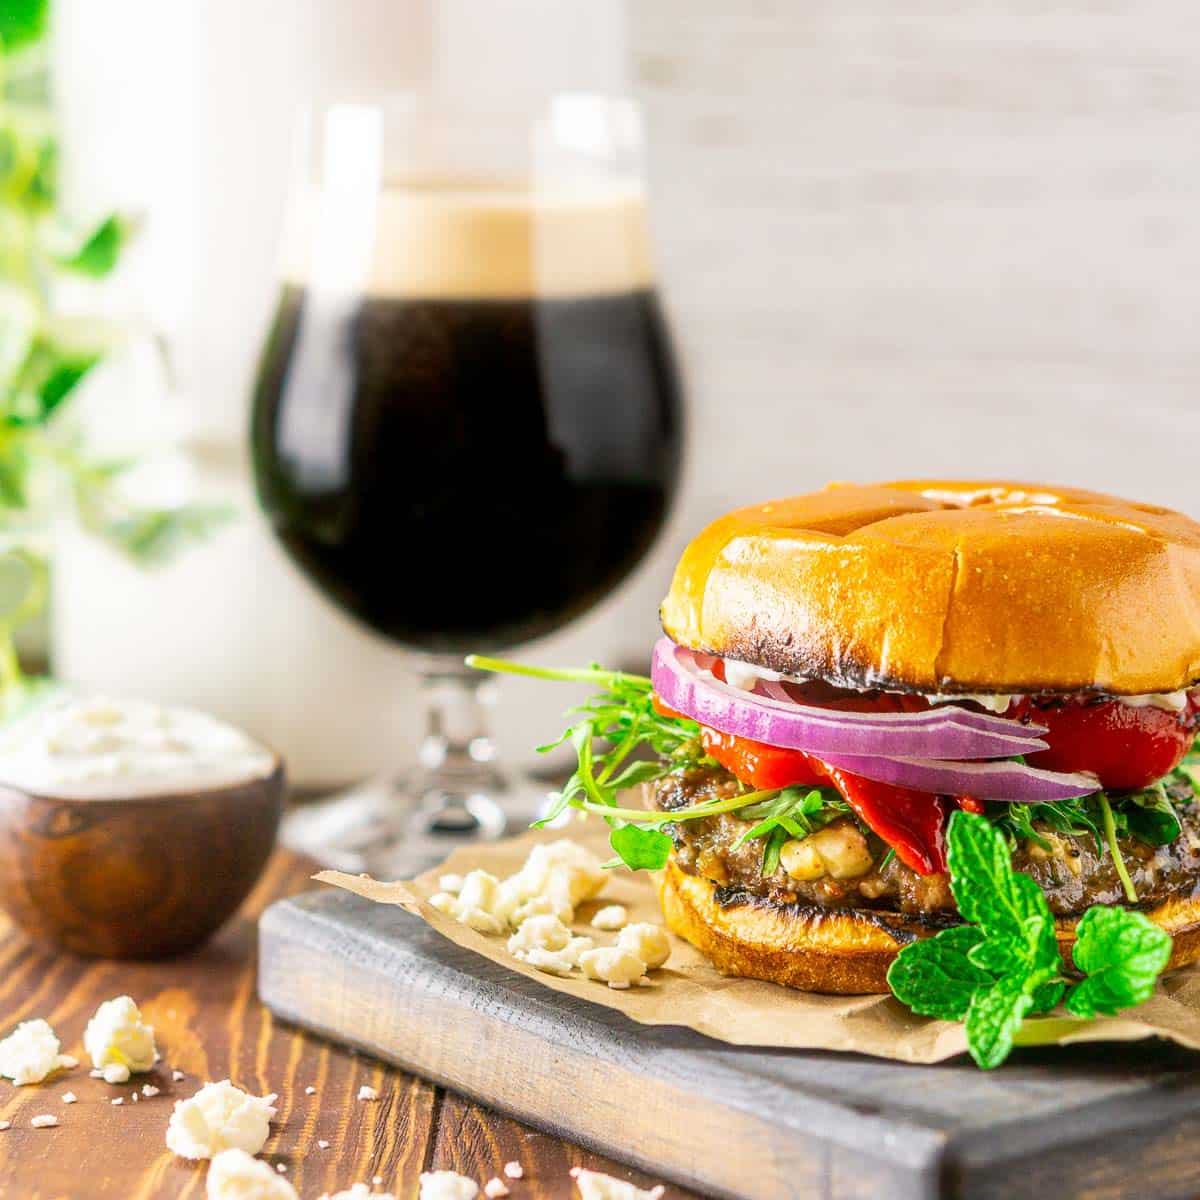 A minted lamb burger on a wooden tray with a stout in the background.